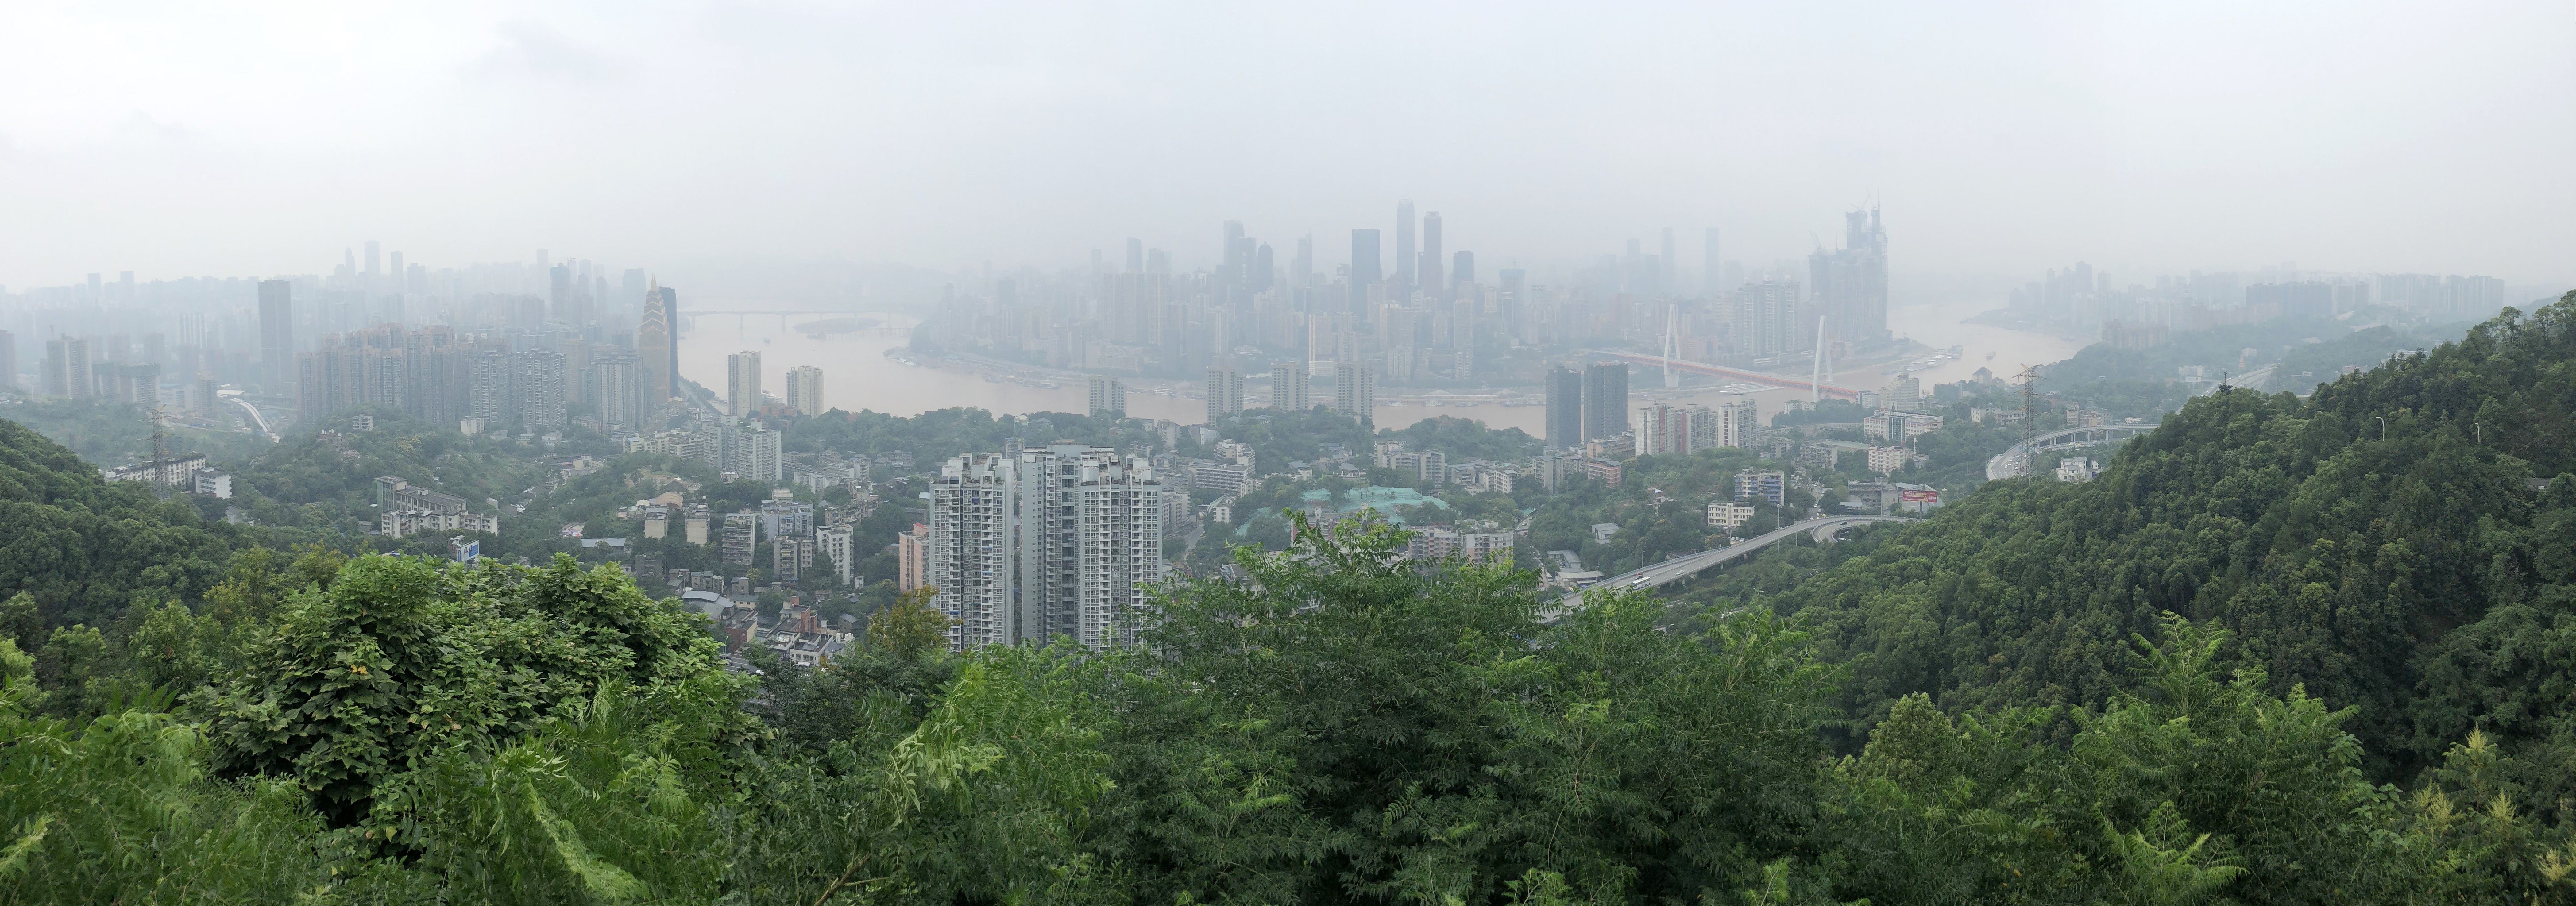 In 2017, while coastal regions still led the way in terms of absolute income, Chongqing (above) and Chengdu outpaced nearly every other Chinese city in terms of economic growth. Photo: Simon Song